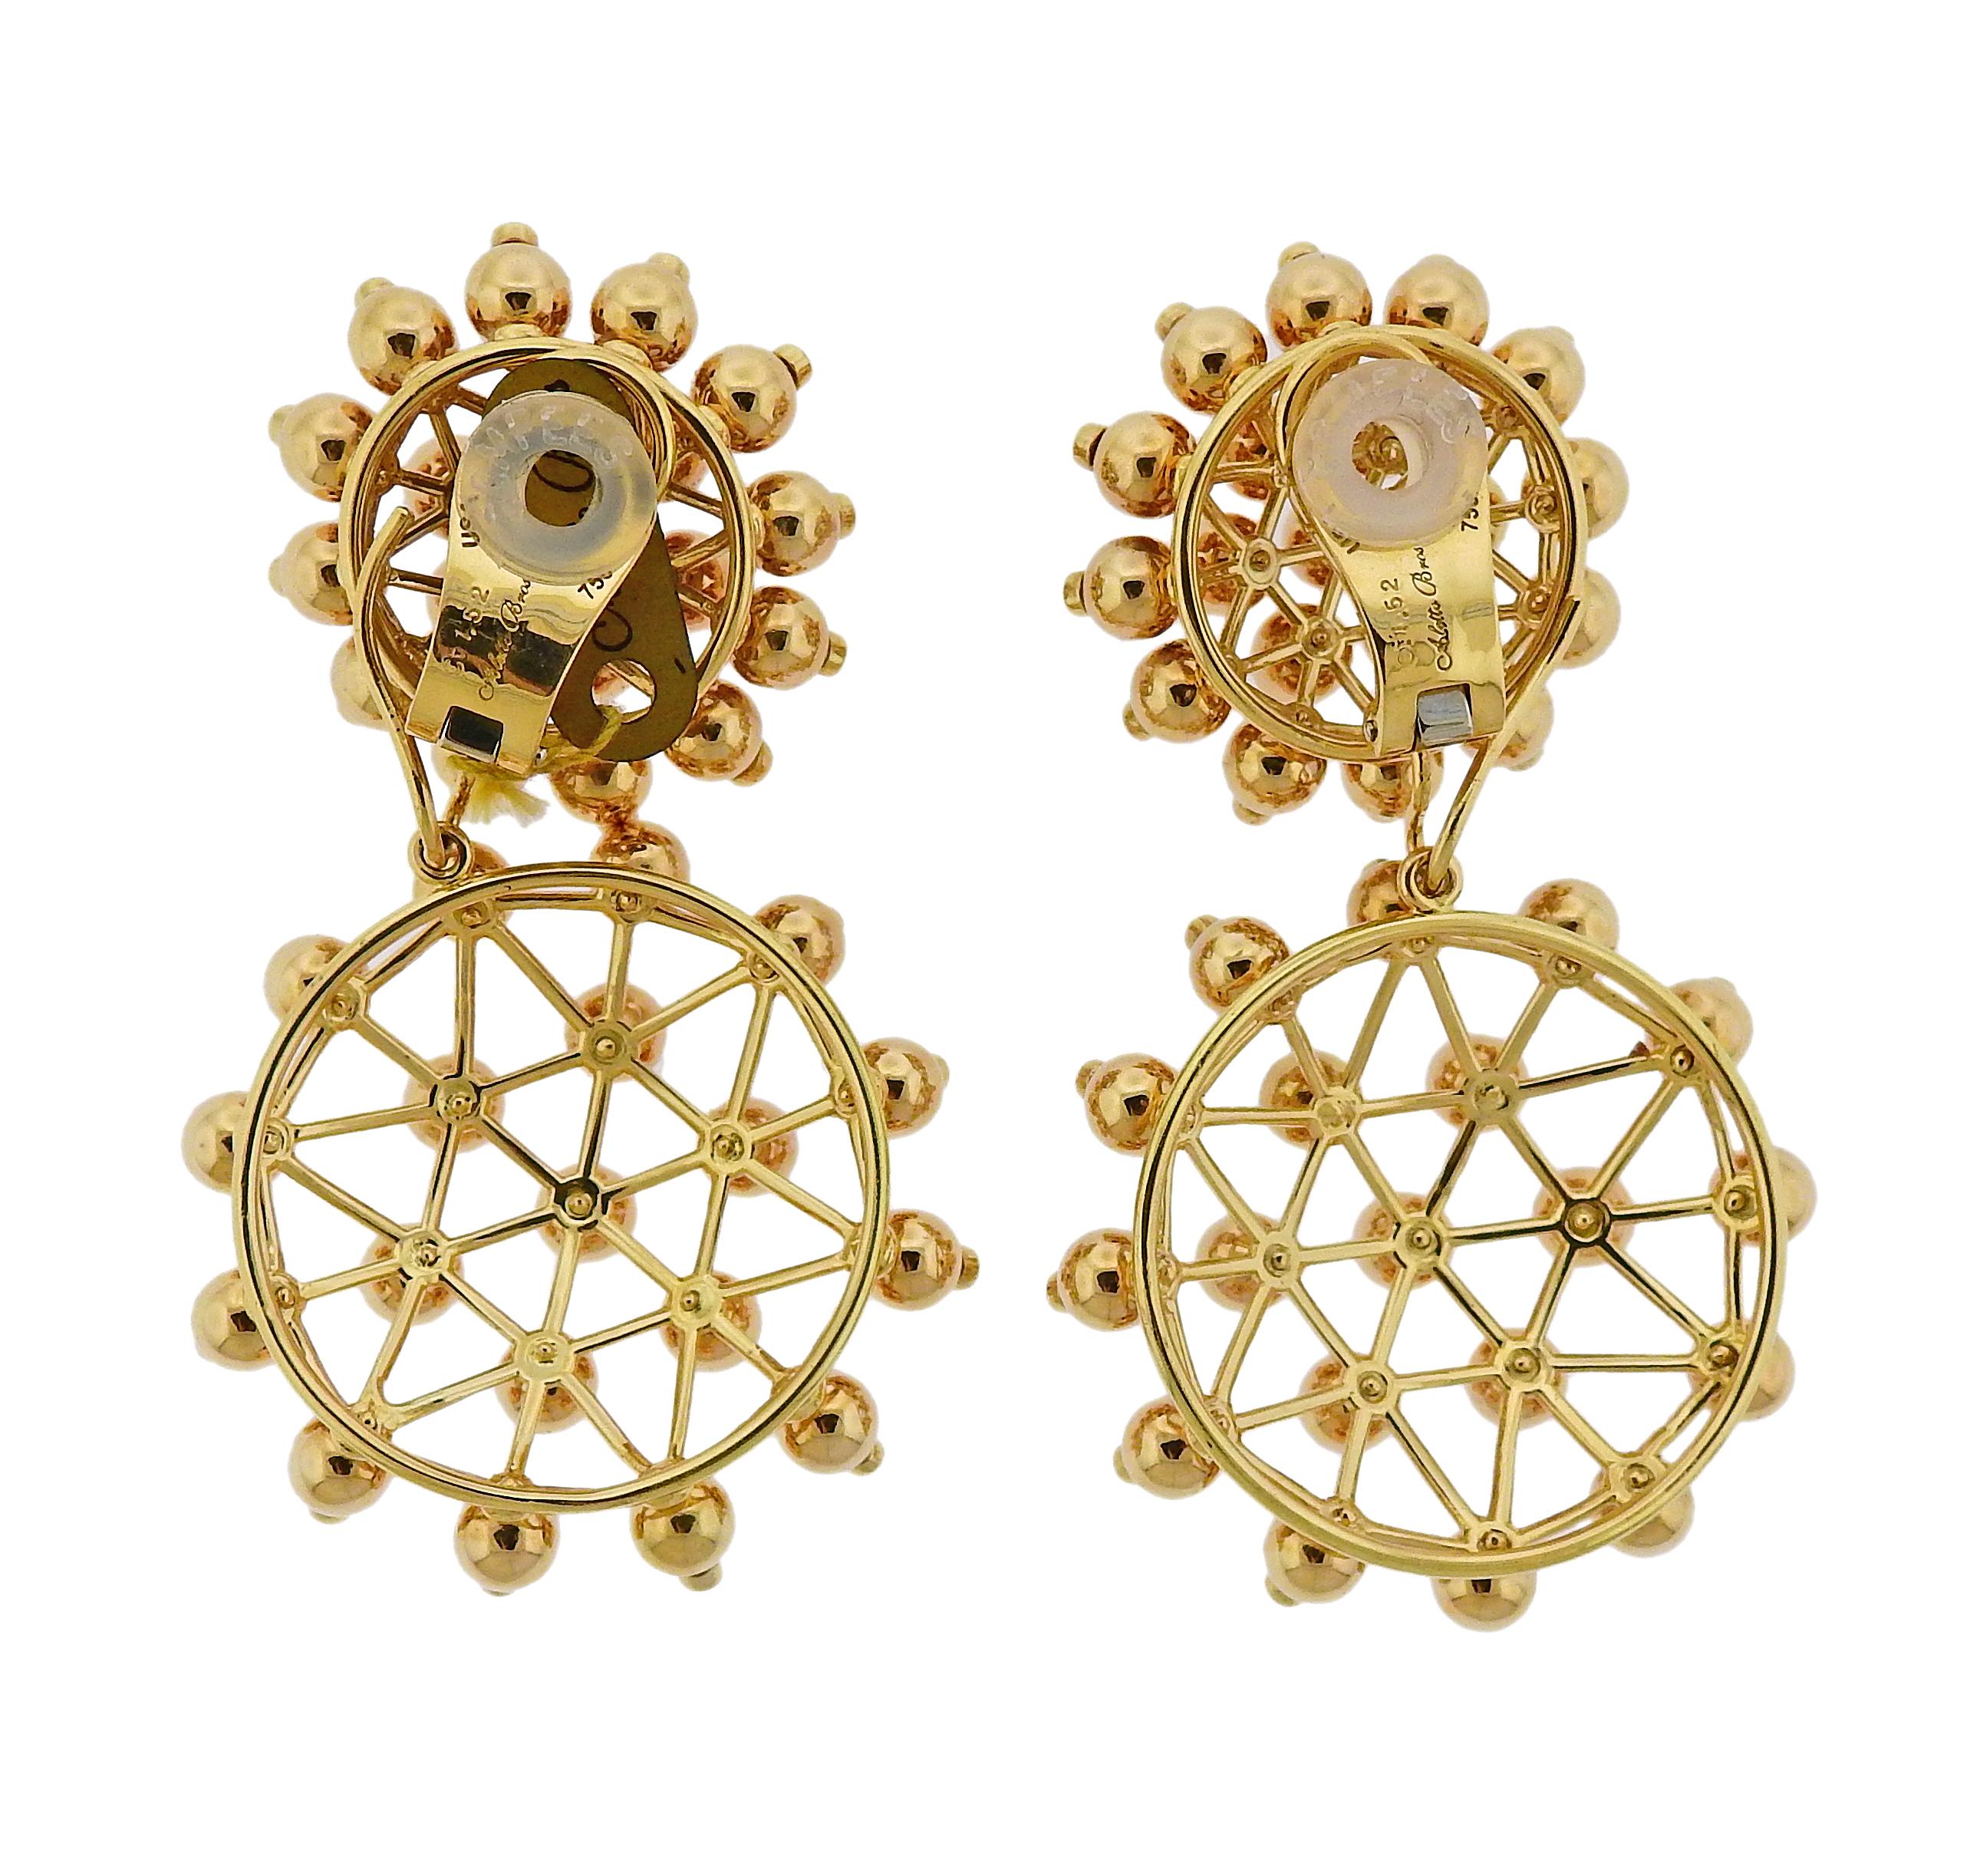 Pair of new 18k yellow gold double wheel drop earrings by Aletto Brothers, featuring removable bottoms for versatile wear. Set with 1.52ctw in VVS-VS/G diamonds. Earrings are 65mm long with drops,  Tops measure 28m in diameter. Bottom removable